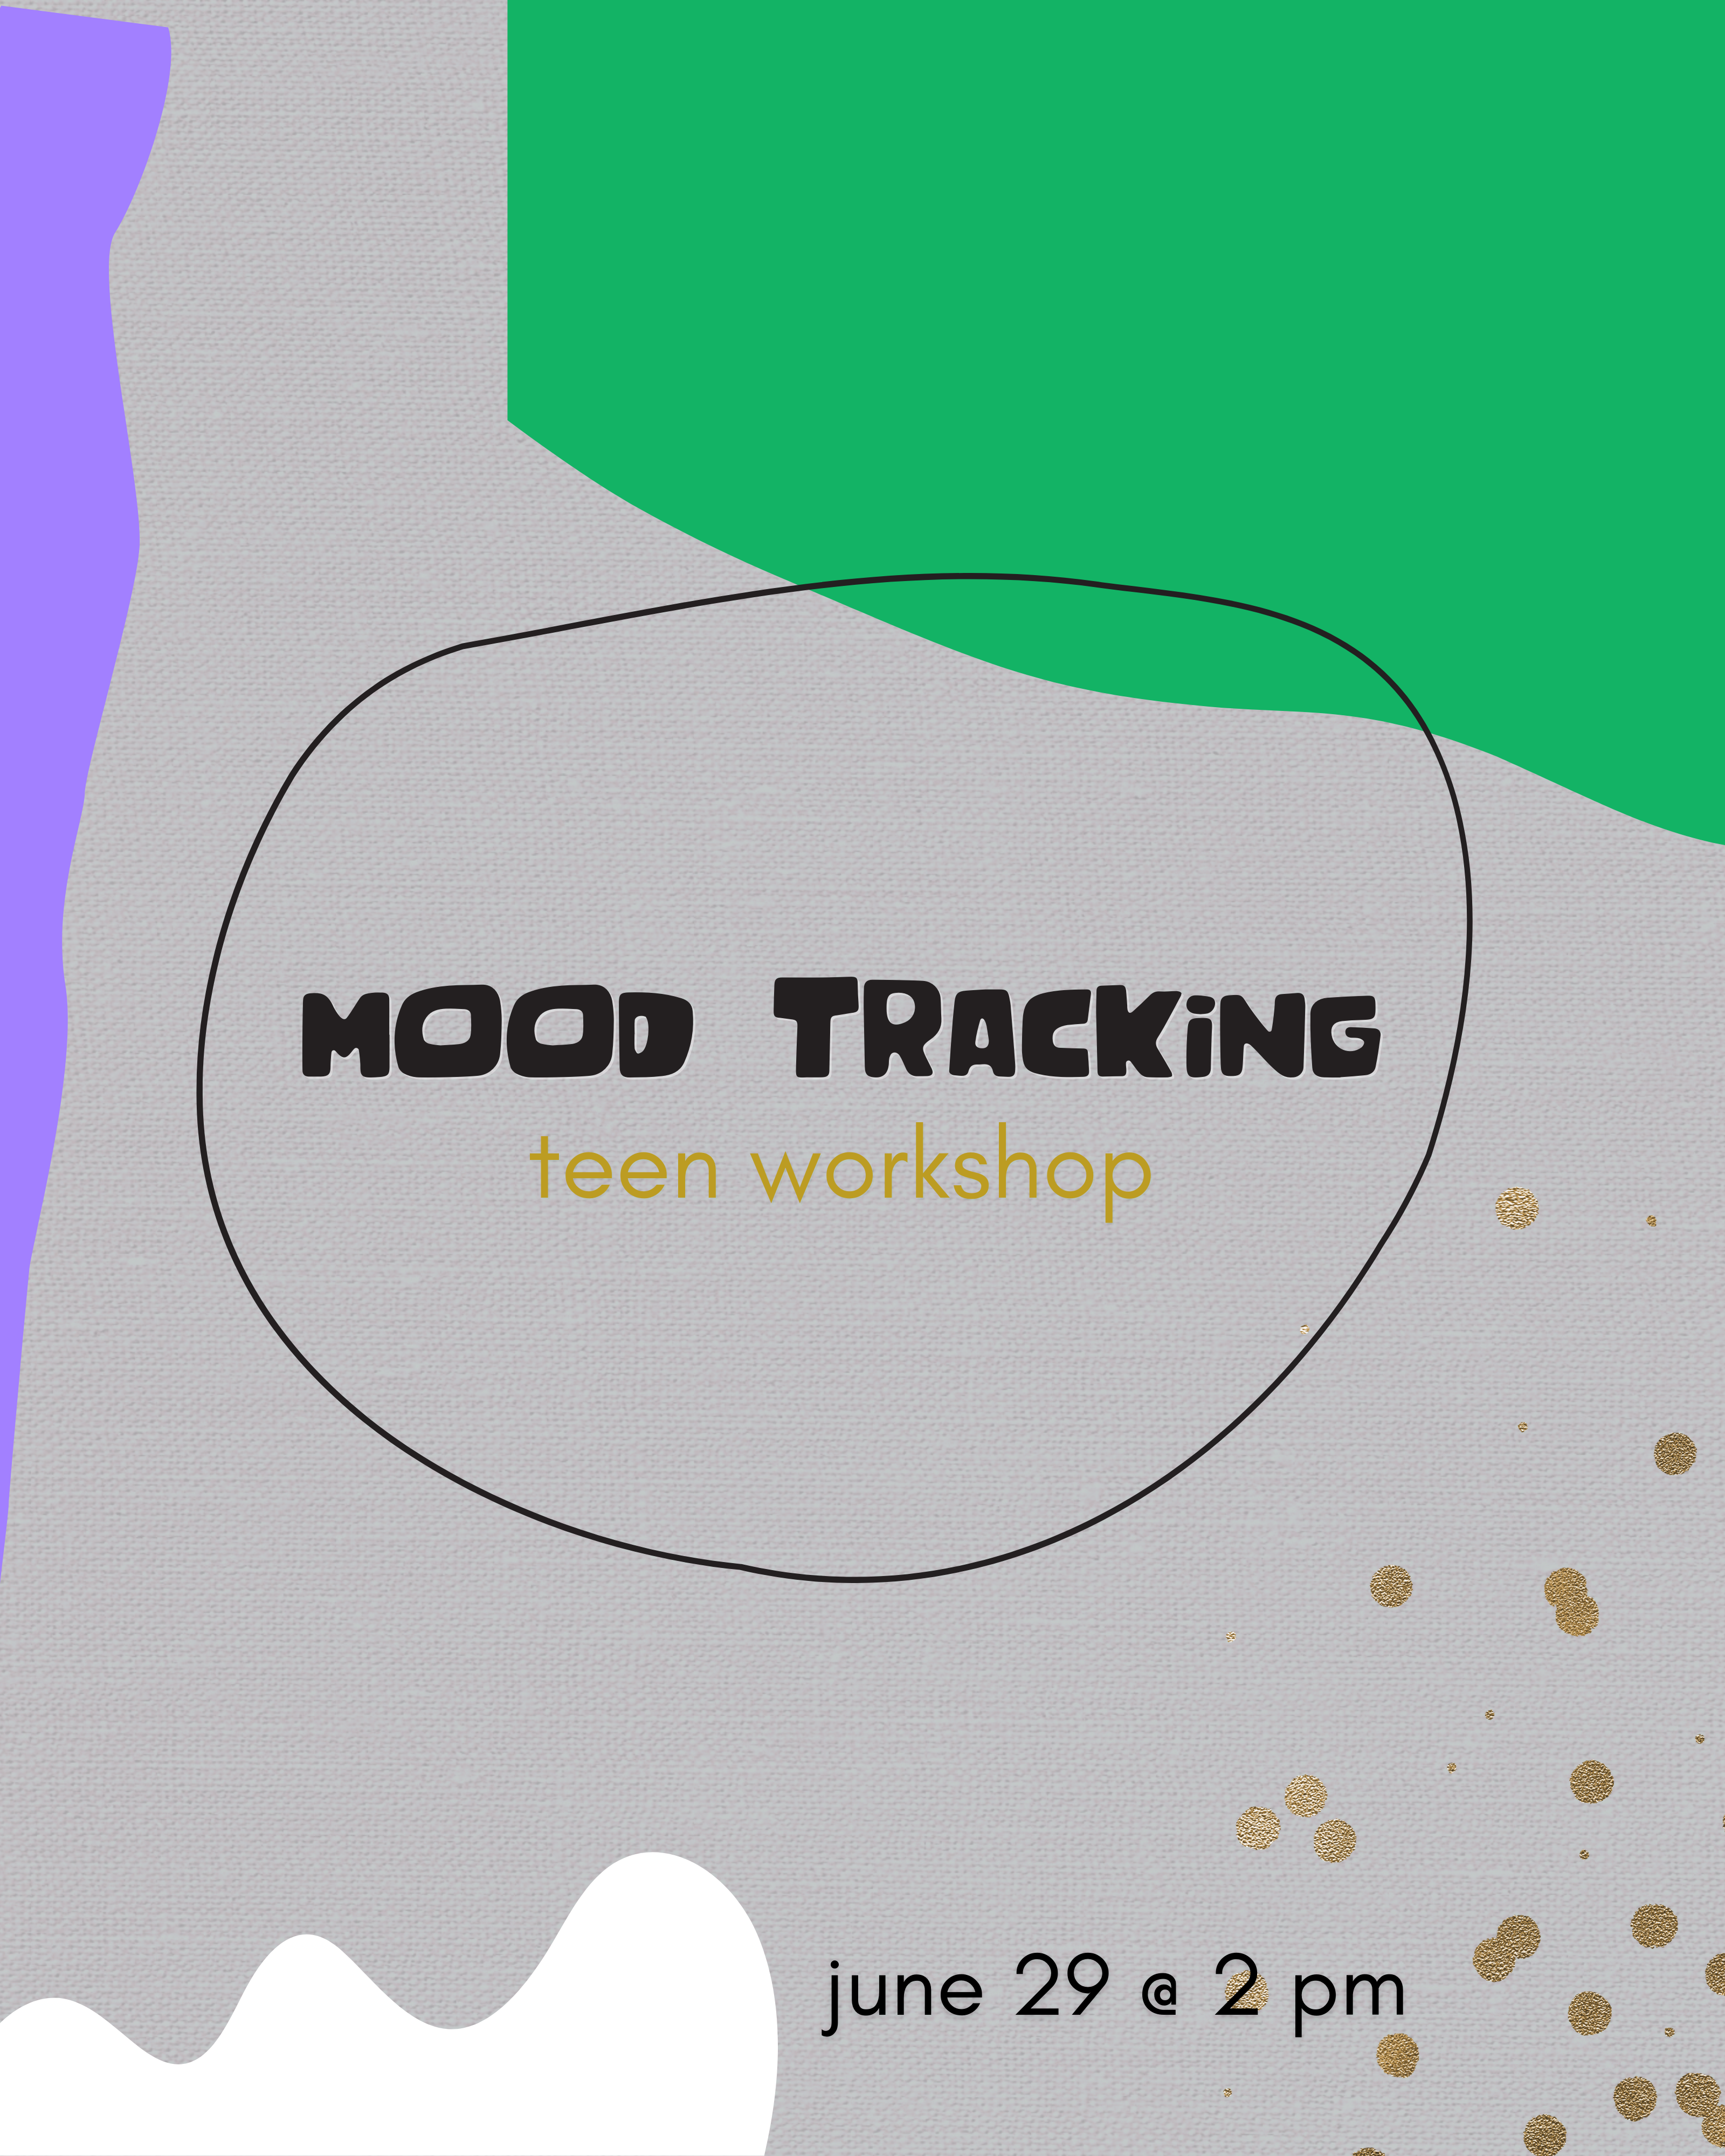 Text-based image reading: Mood Tracking / teen workshop / June 29 @ 2 PM